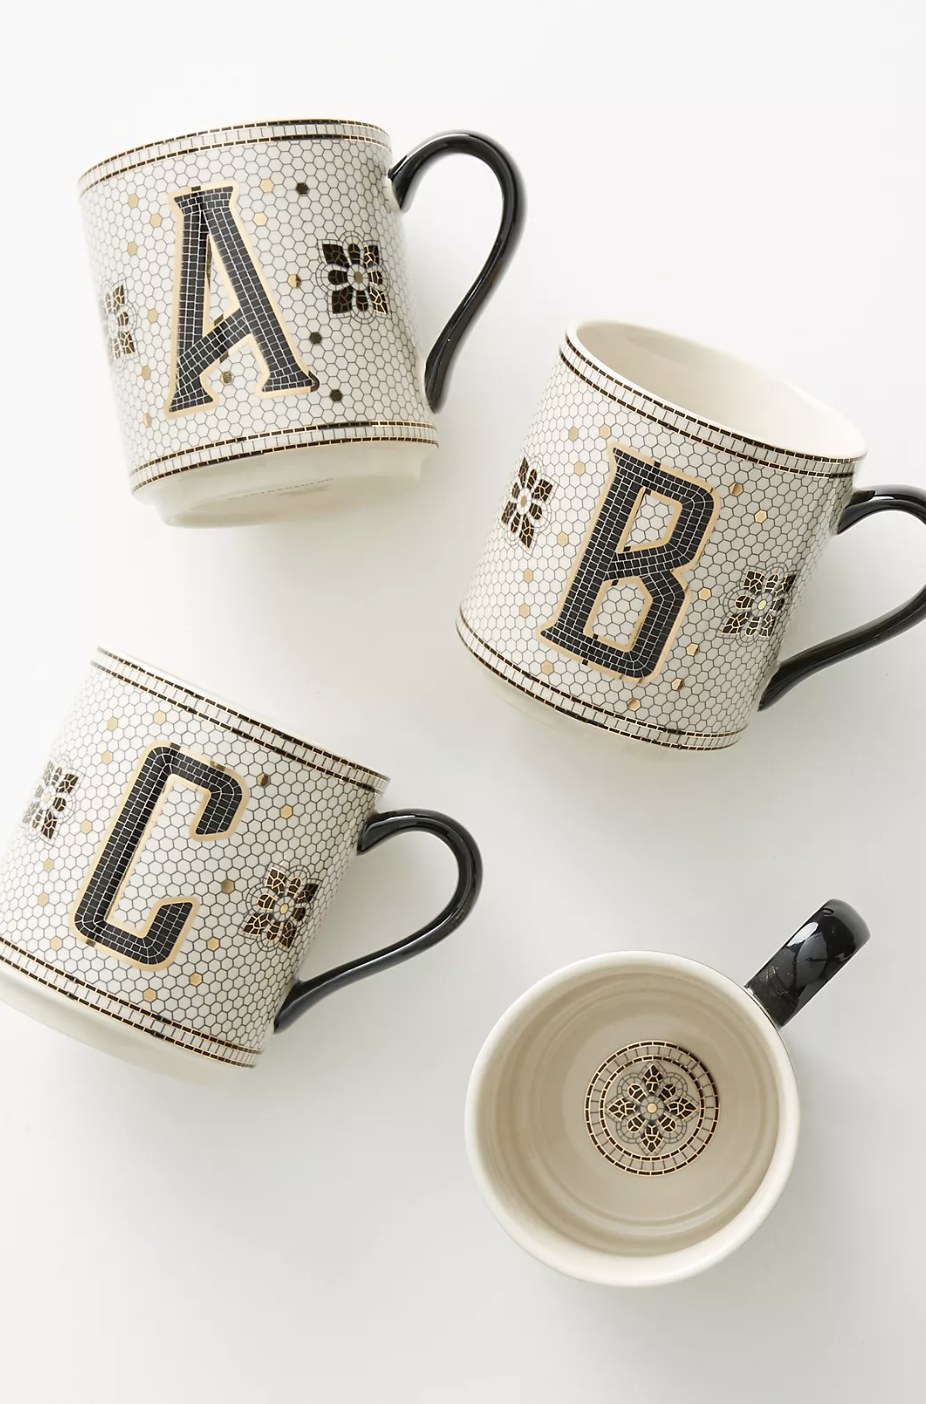 The monogrammed mugs with gold and black detailing on the white ceramic tile design in letters A, B and C